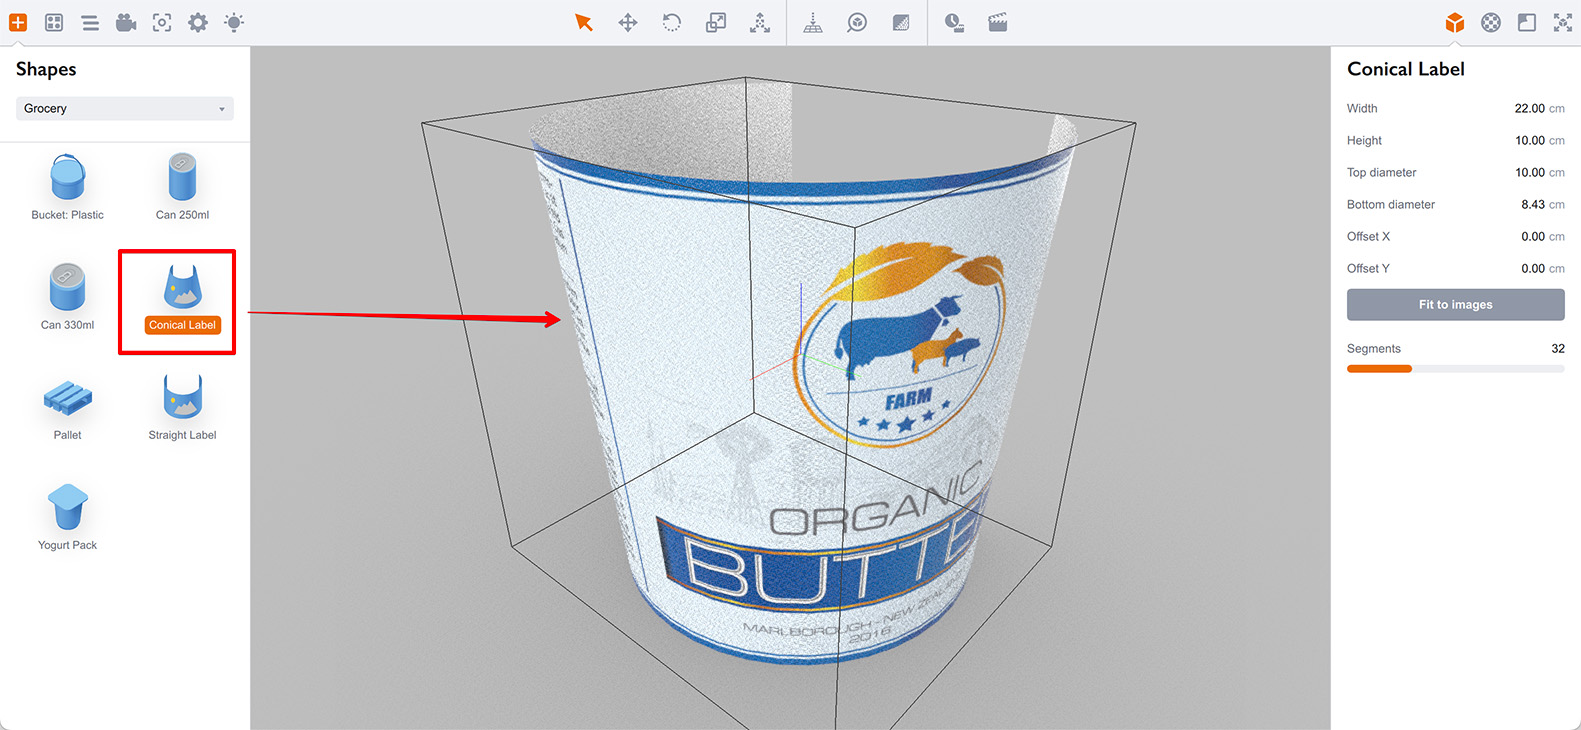 Adding a conical label shape to the Boxshot scene